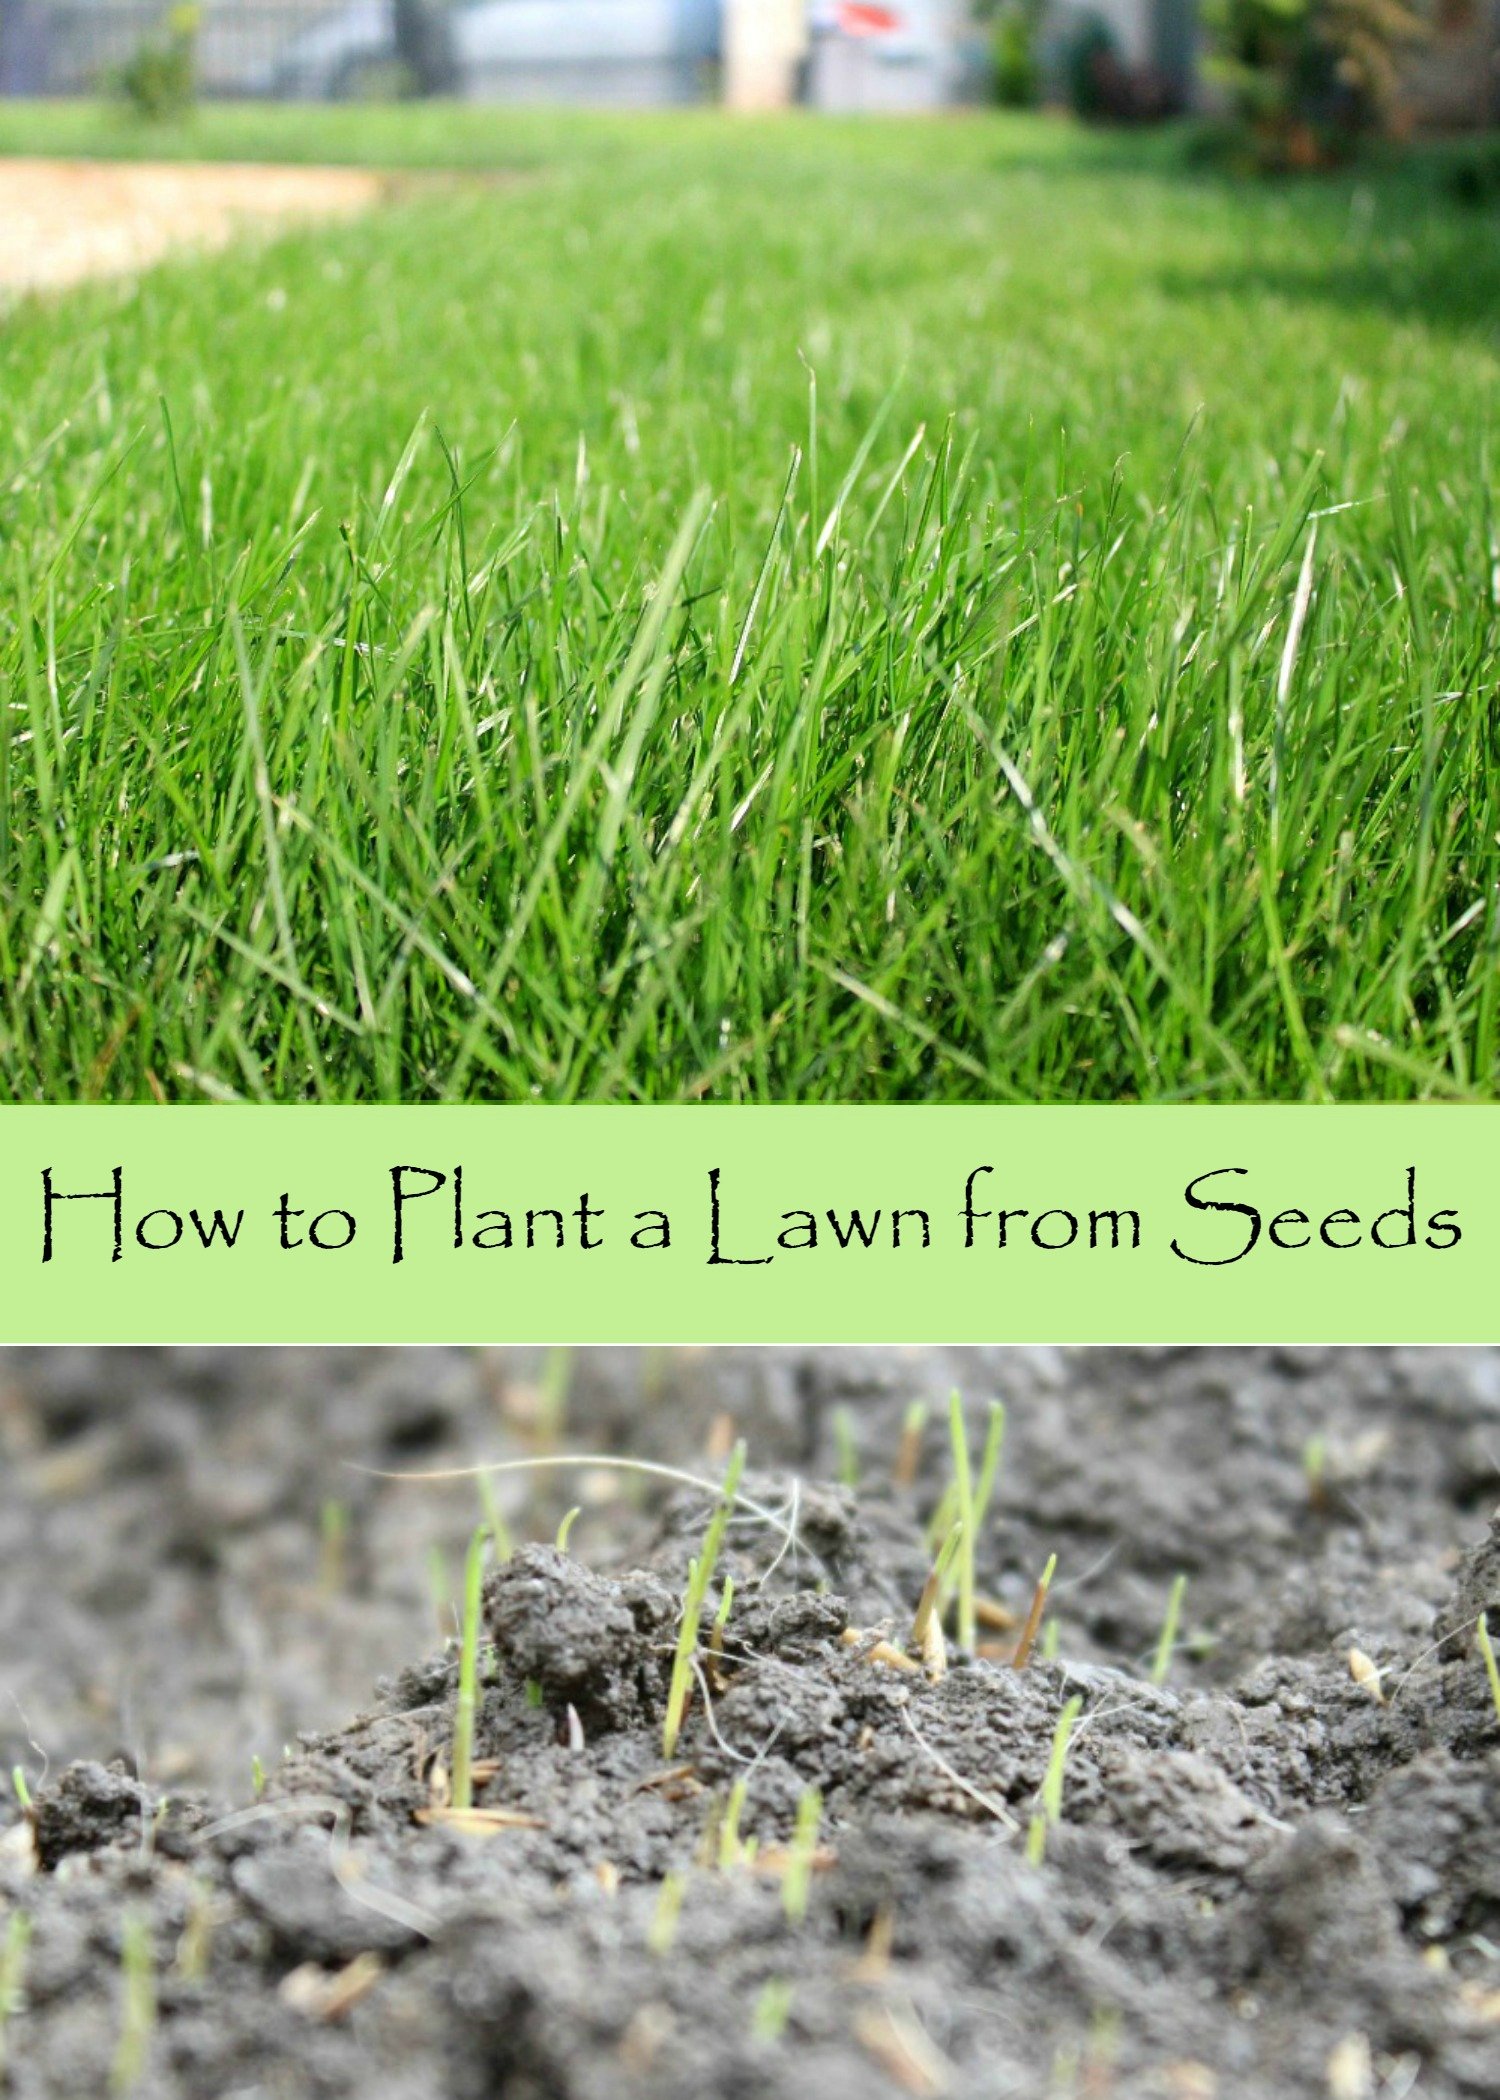 How to Plant a Lawn from Seed